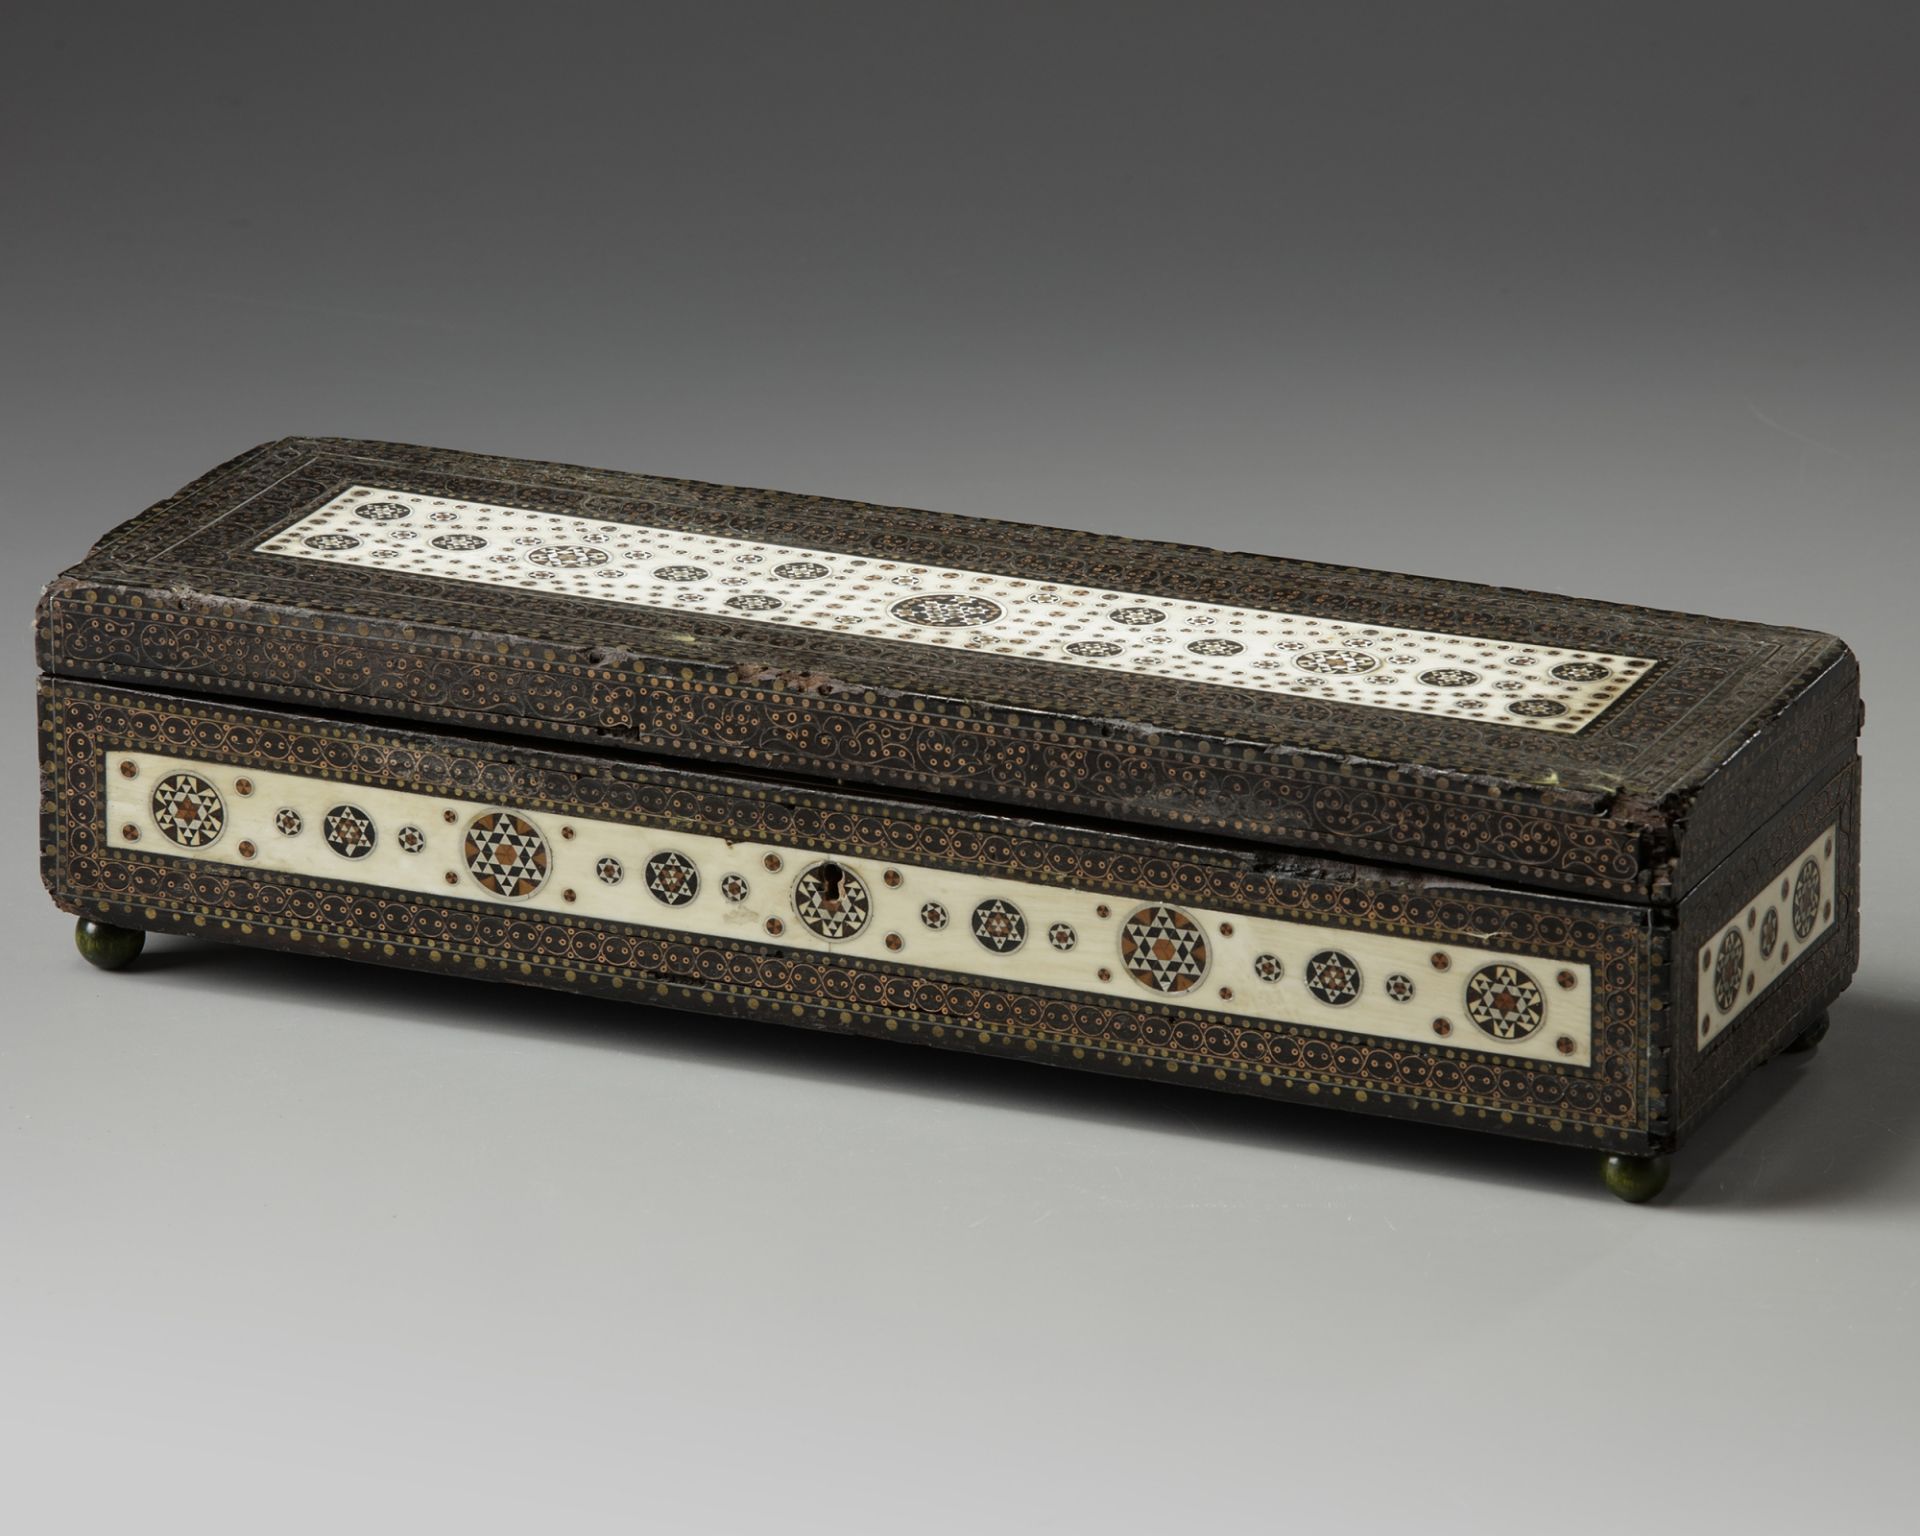 A silver and ivory inlaid wooden box